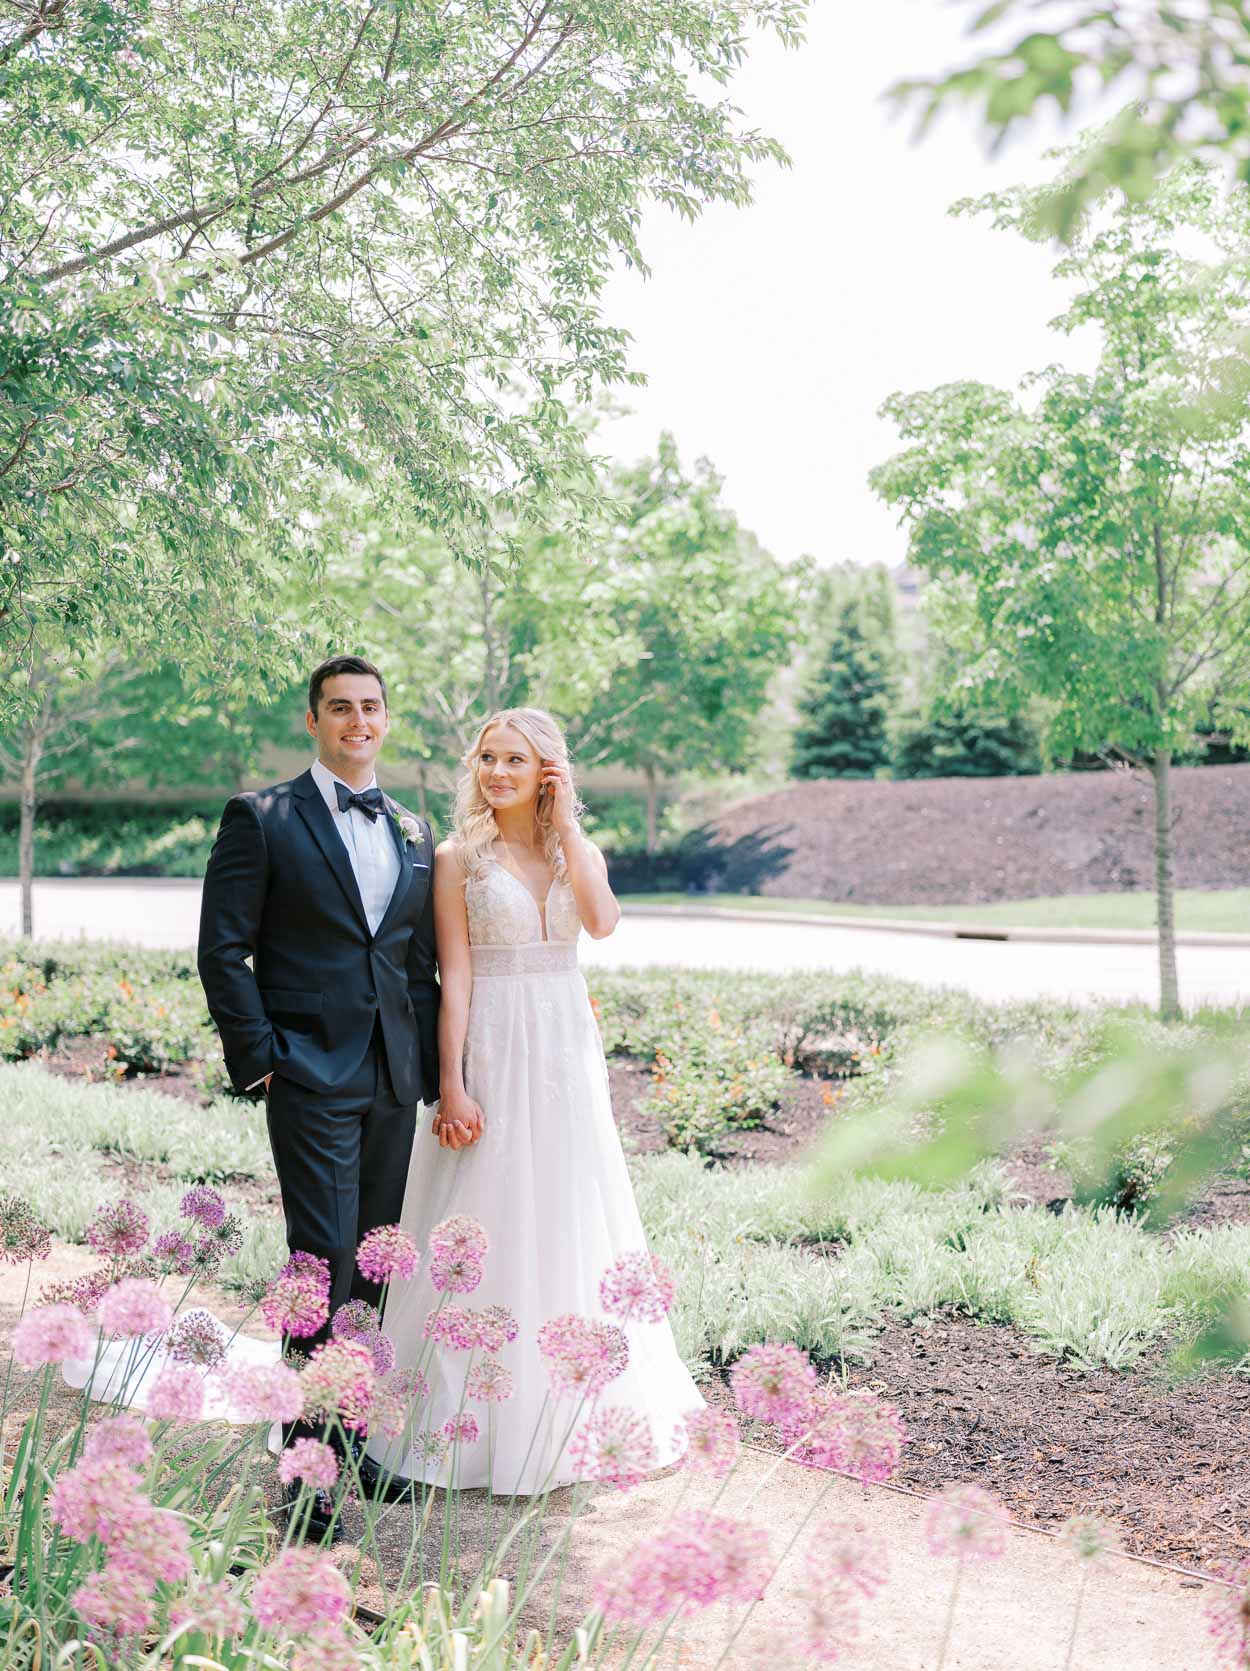 Bride and groom portraits for their colorful Market Place wedding at Crocker Park